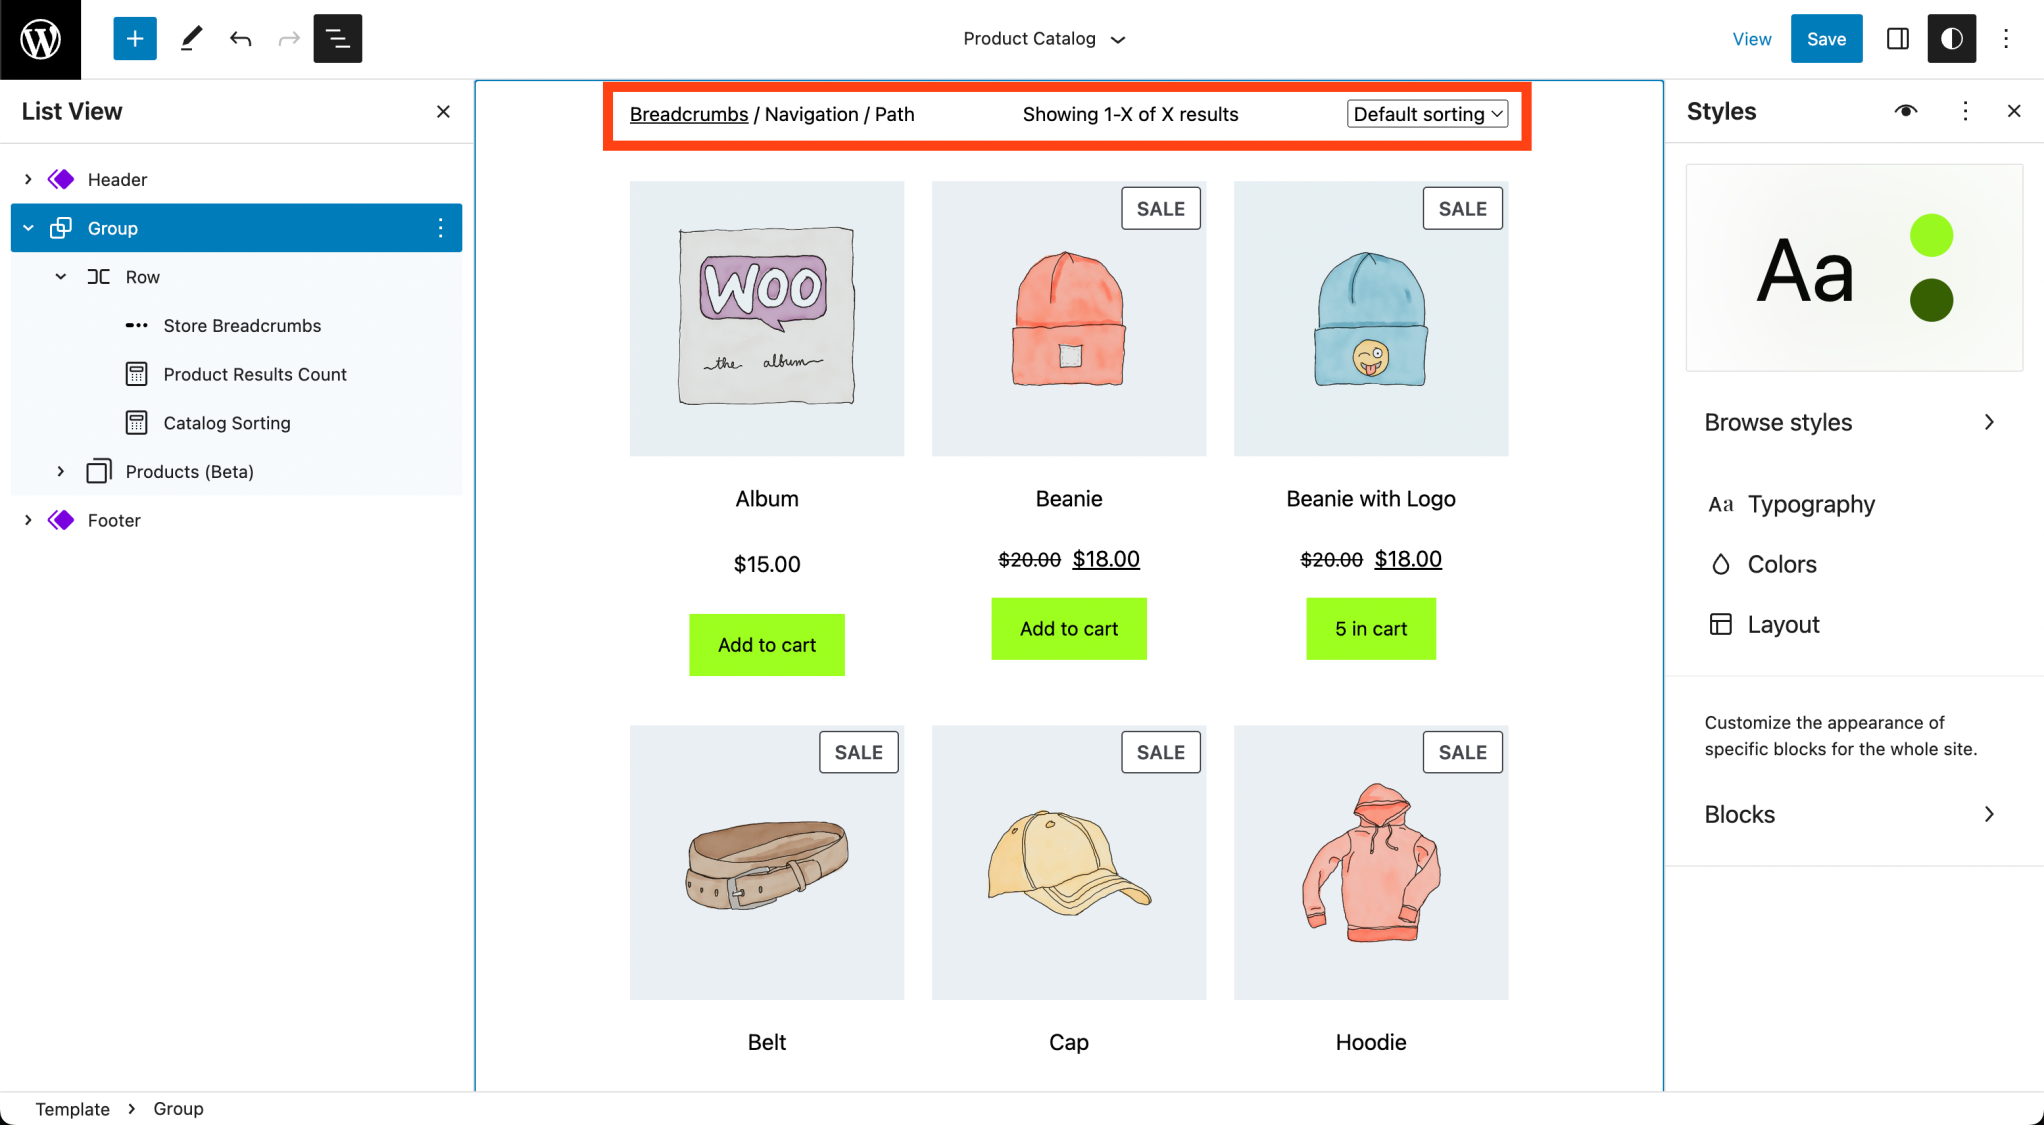 WooCommerce 7.5.0 Introduces 3 New Blocks, Expands Support for Global Styles